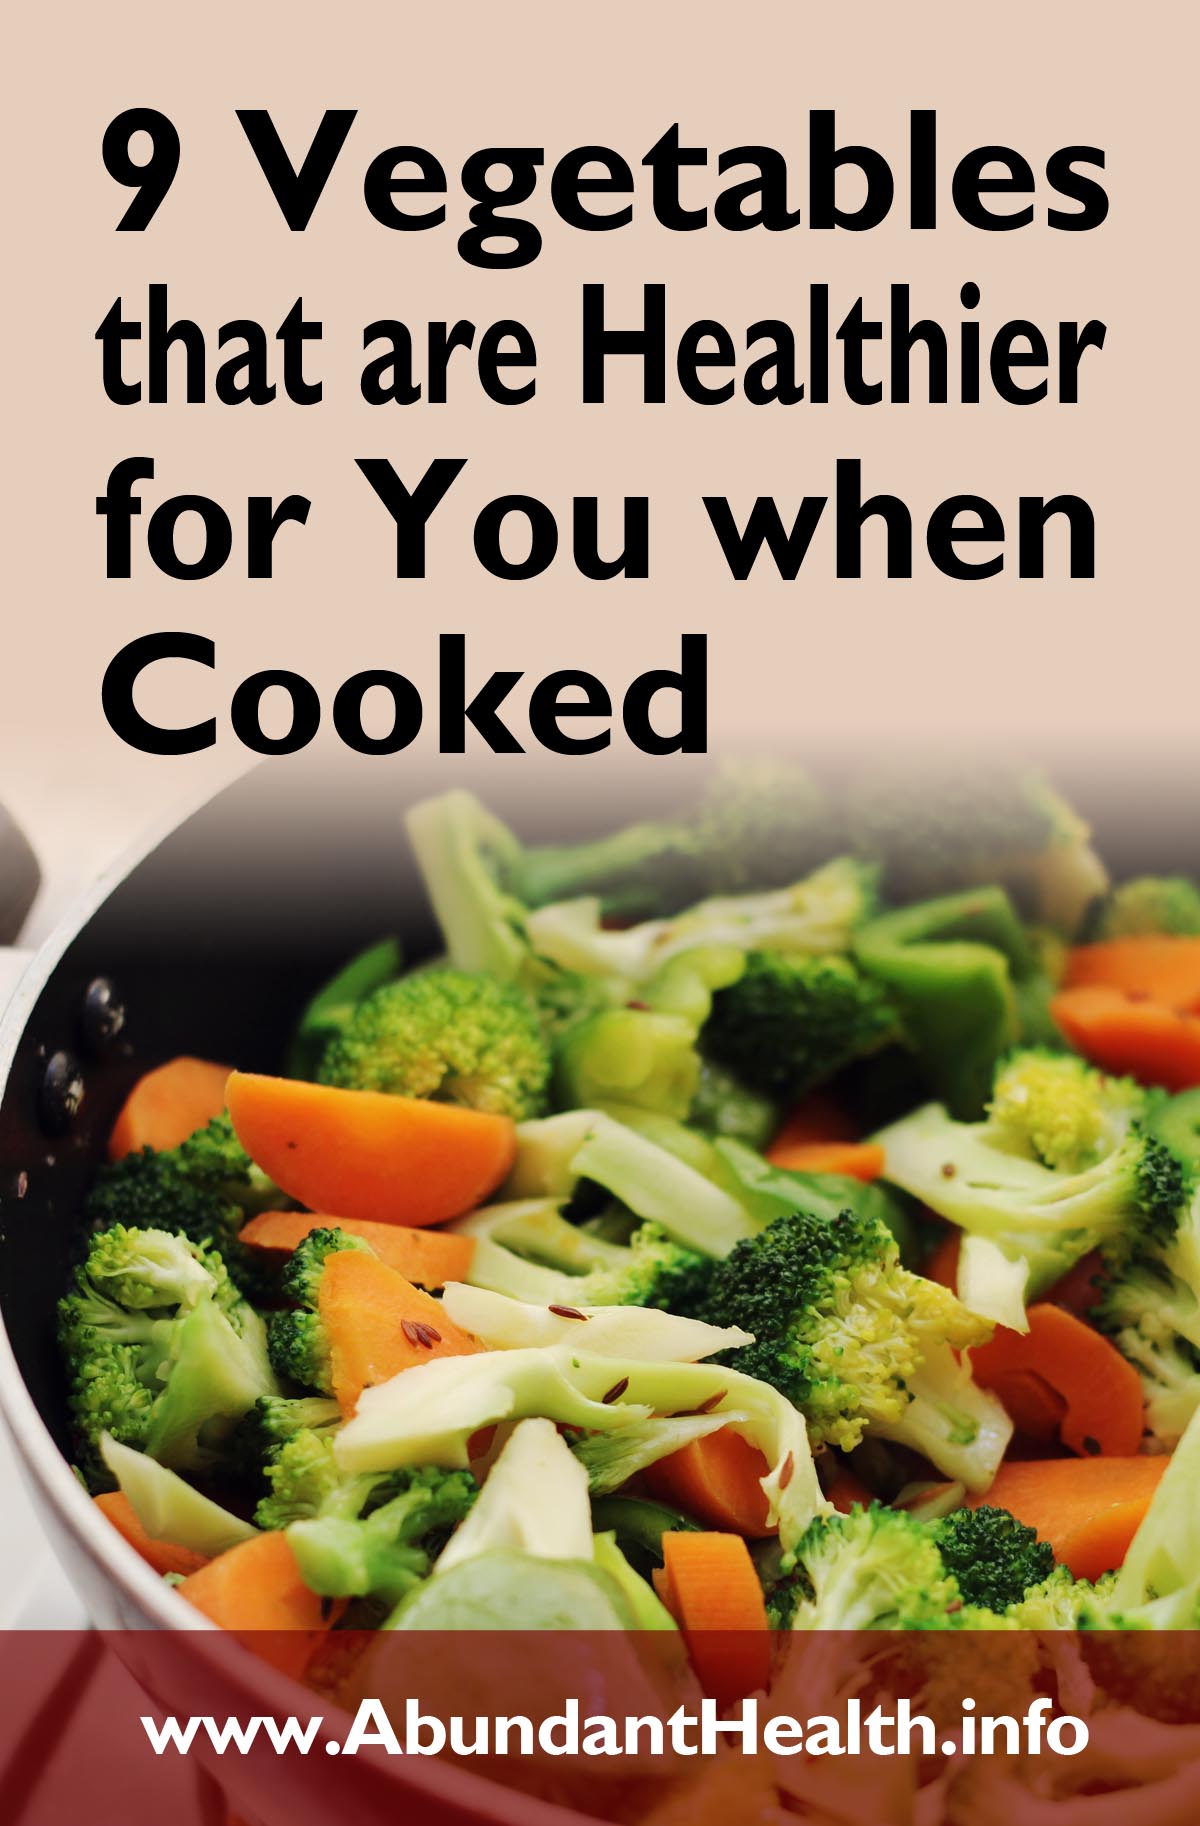 Nine Vegetables that are Healthier for You when Cooked